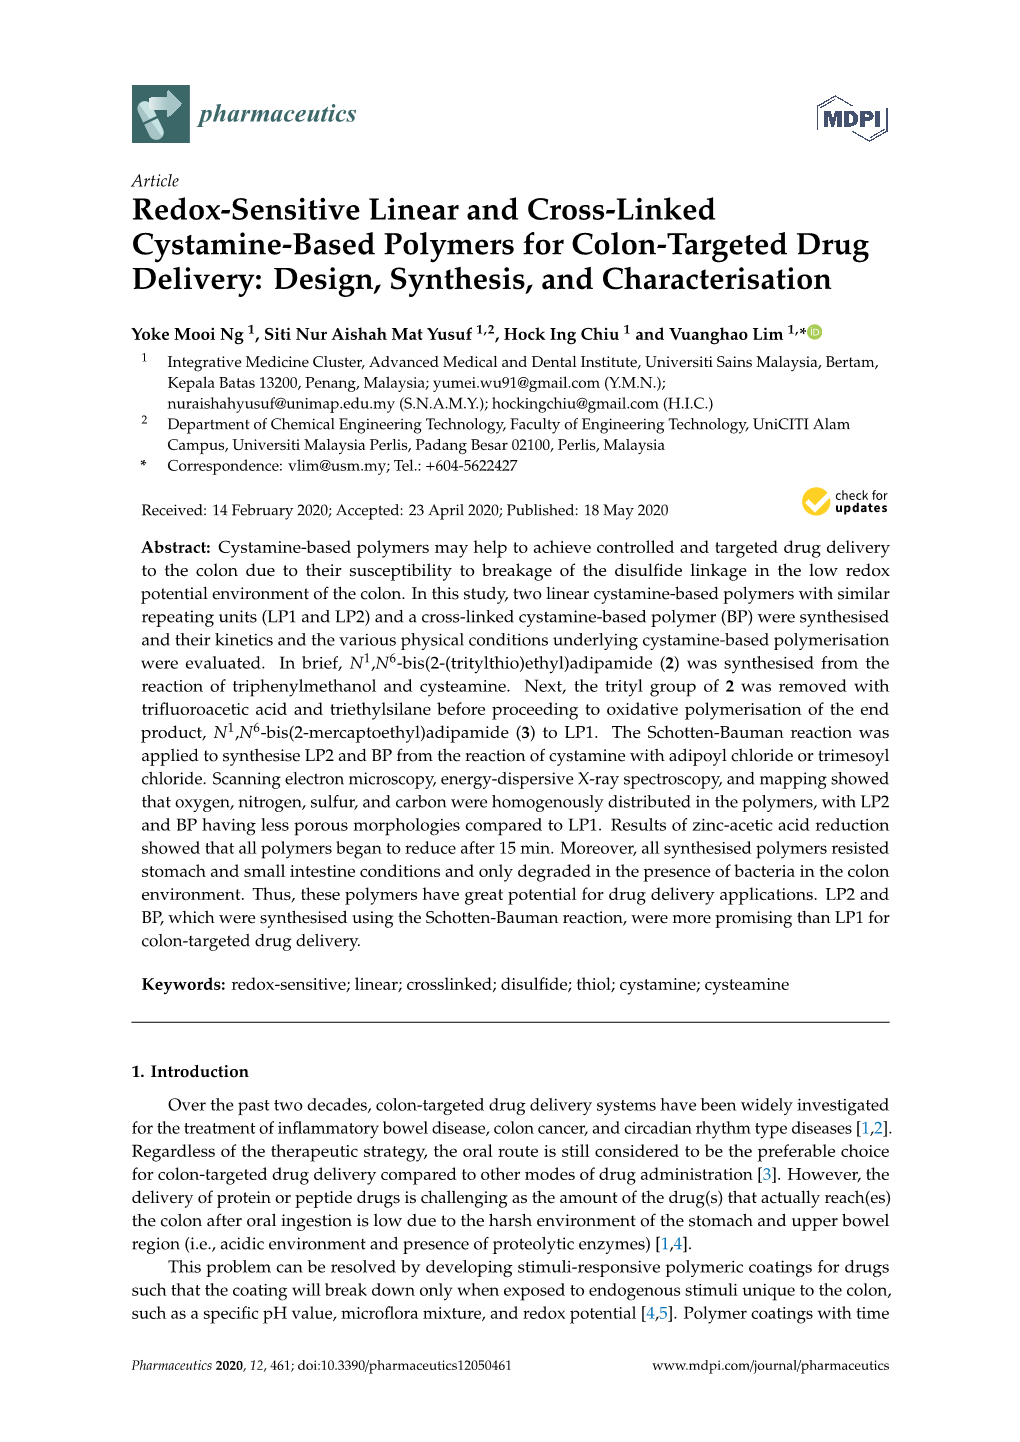 Redox-Sensitive Linear and Cross-Linked Cystamine-Based Polymers for Colon-Targeted Drug Delivery: Design, Synthesis, and Characterisation